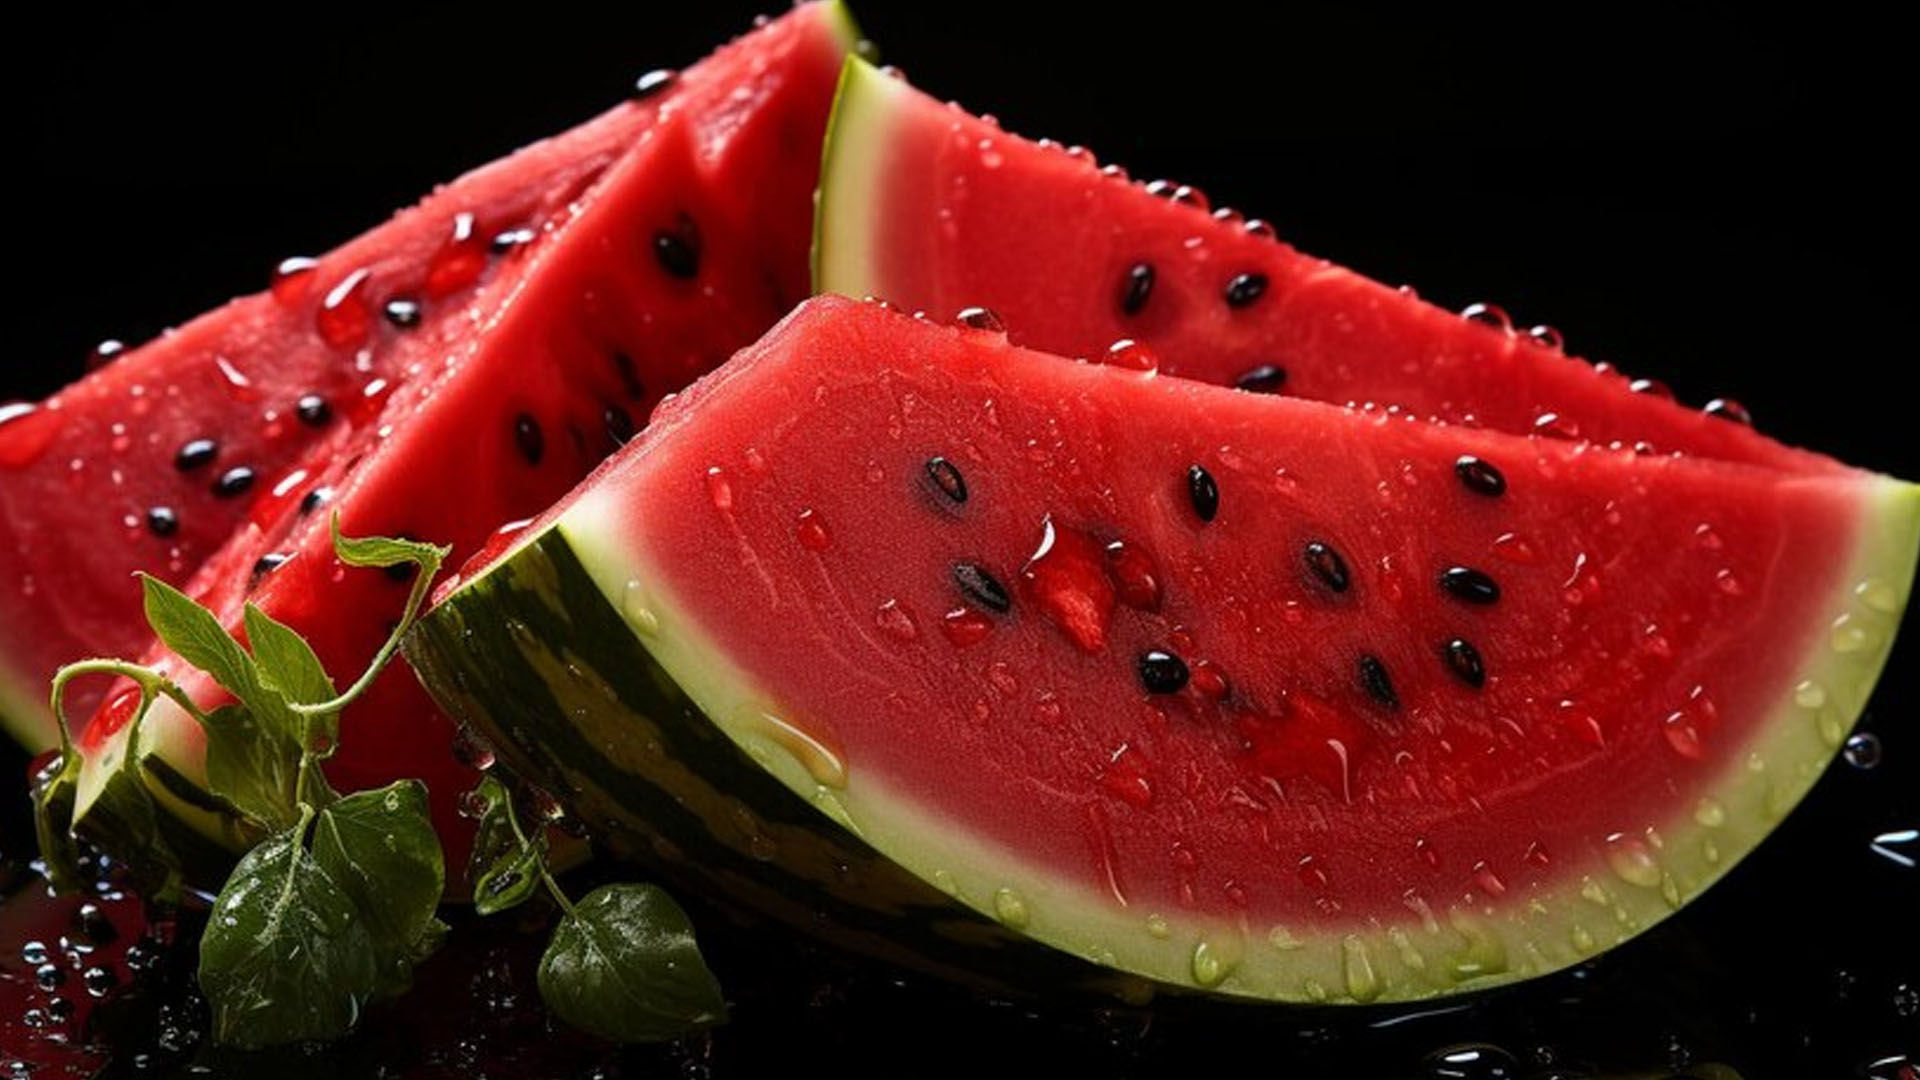 What are the Health Benefits of eating Watermelon?